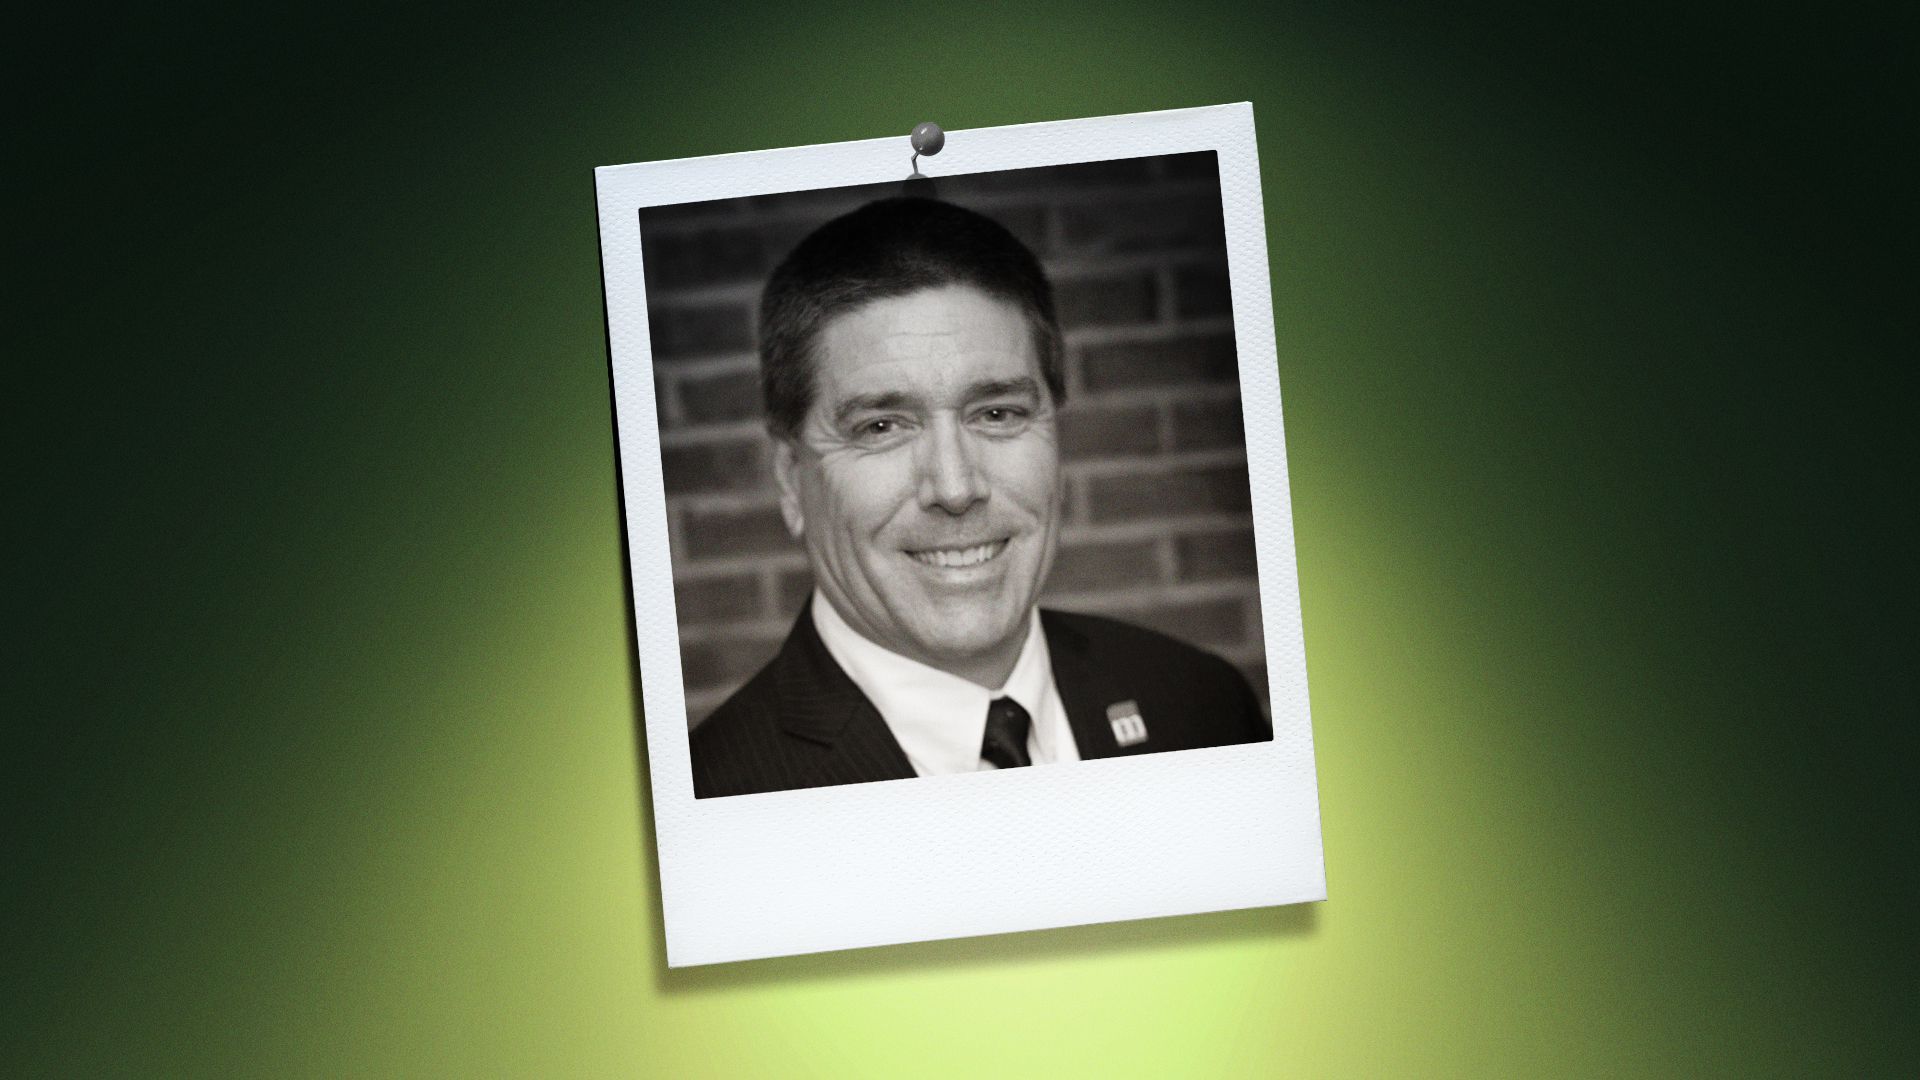 Photo illustration of Morrisville, NC Mayor TJ Cawley, in the center of a Polaroid photo under a green spotlight.